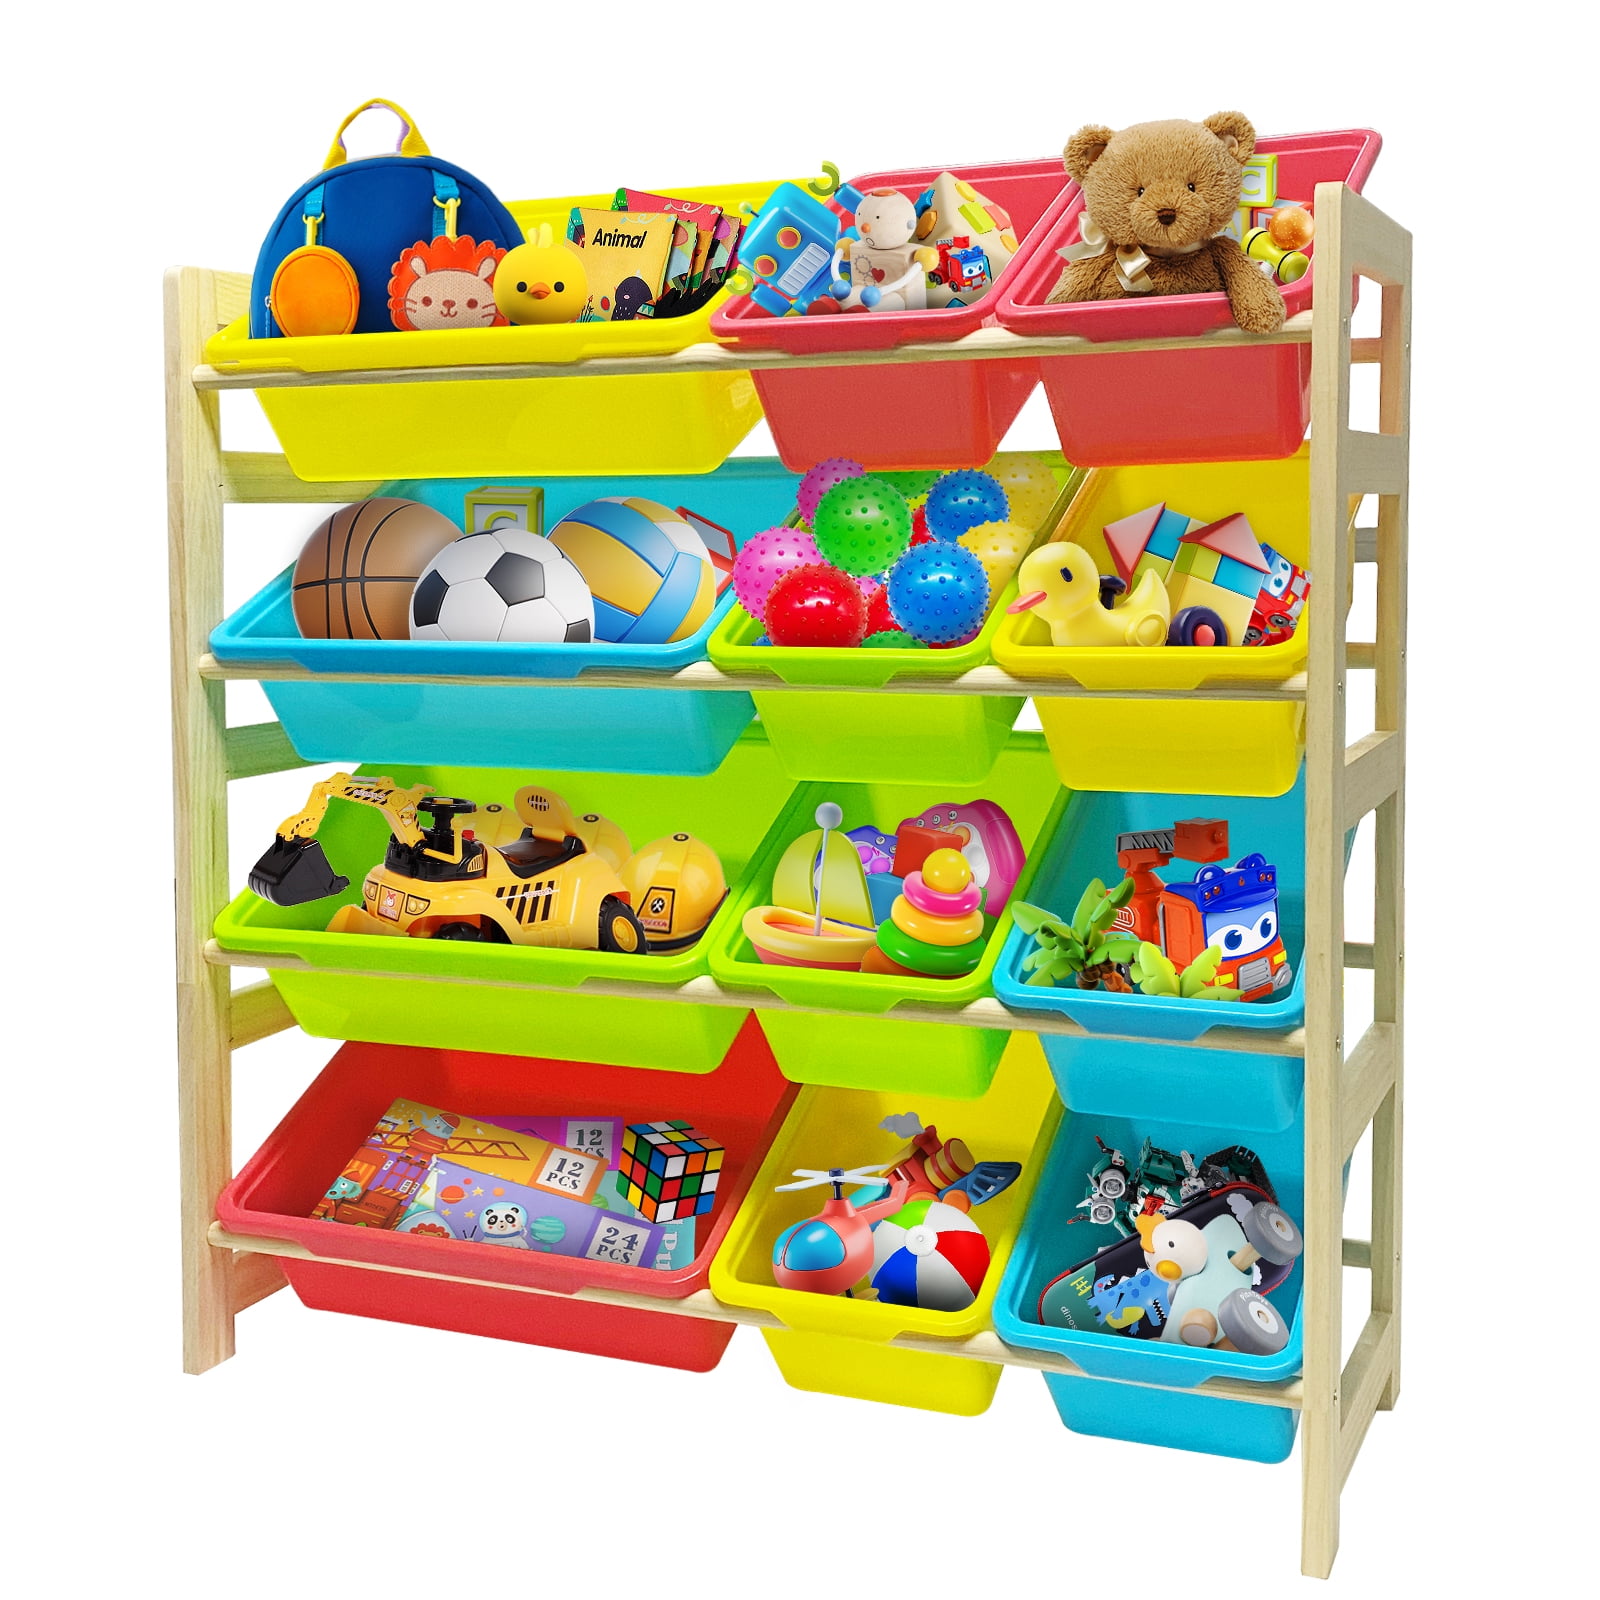 Wedanta Kids Toys Storage Organizer Shelf Organizer for Books and Toys with  4 Bins 1 Cabinet and 2 Shelves - Multipurpose Toy and Book Storage